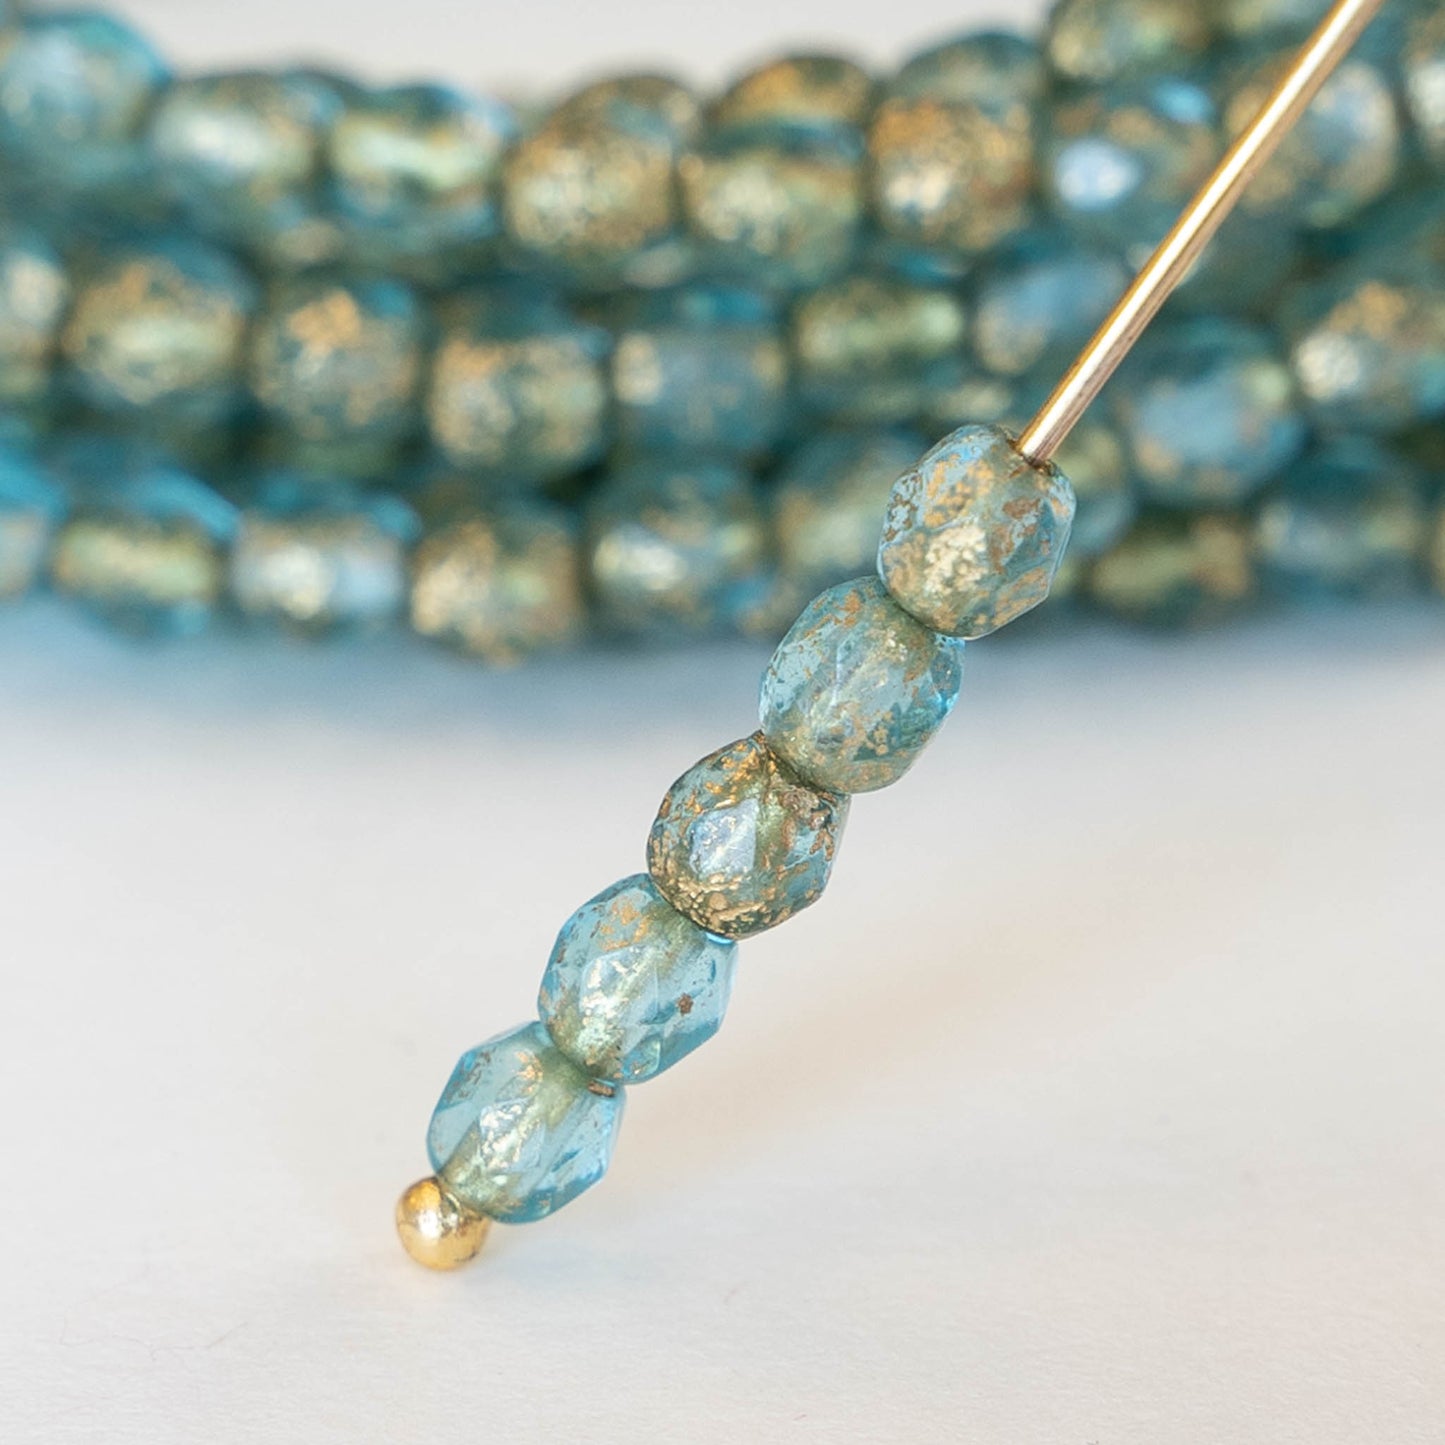 4mm Round Firepolished Beads - Etched Aqua with Gold Dust - 50 Beads